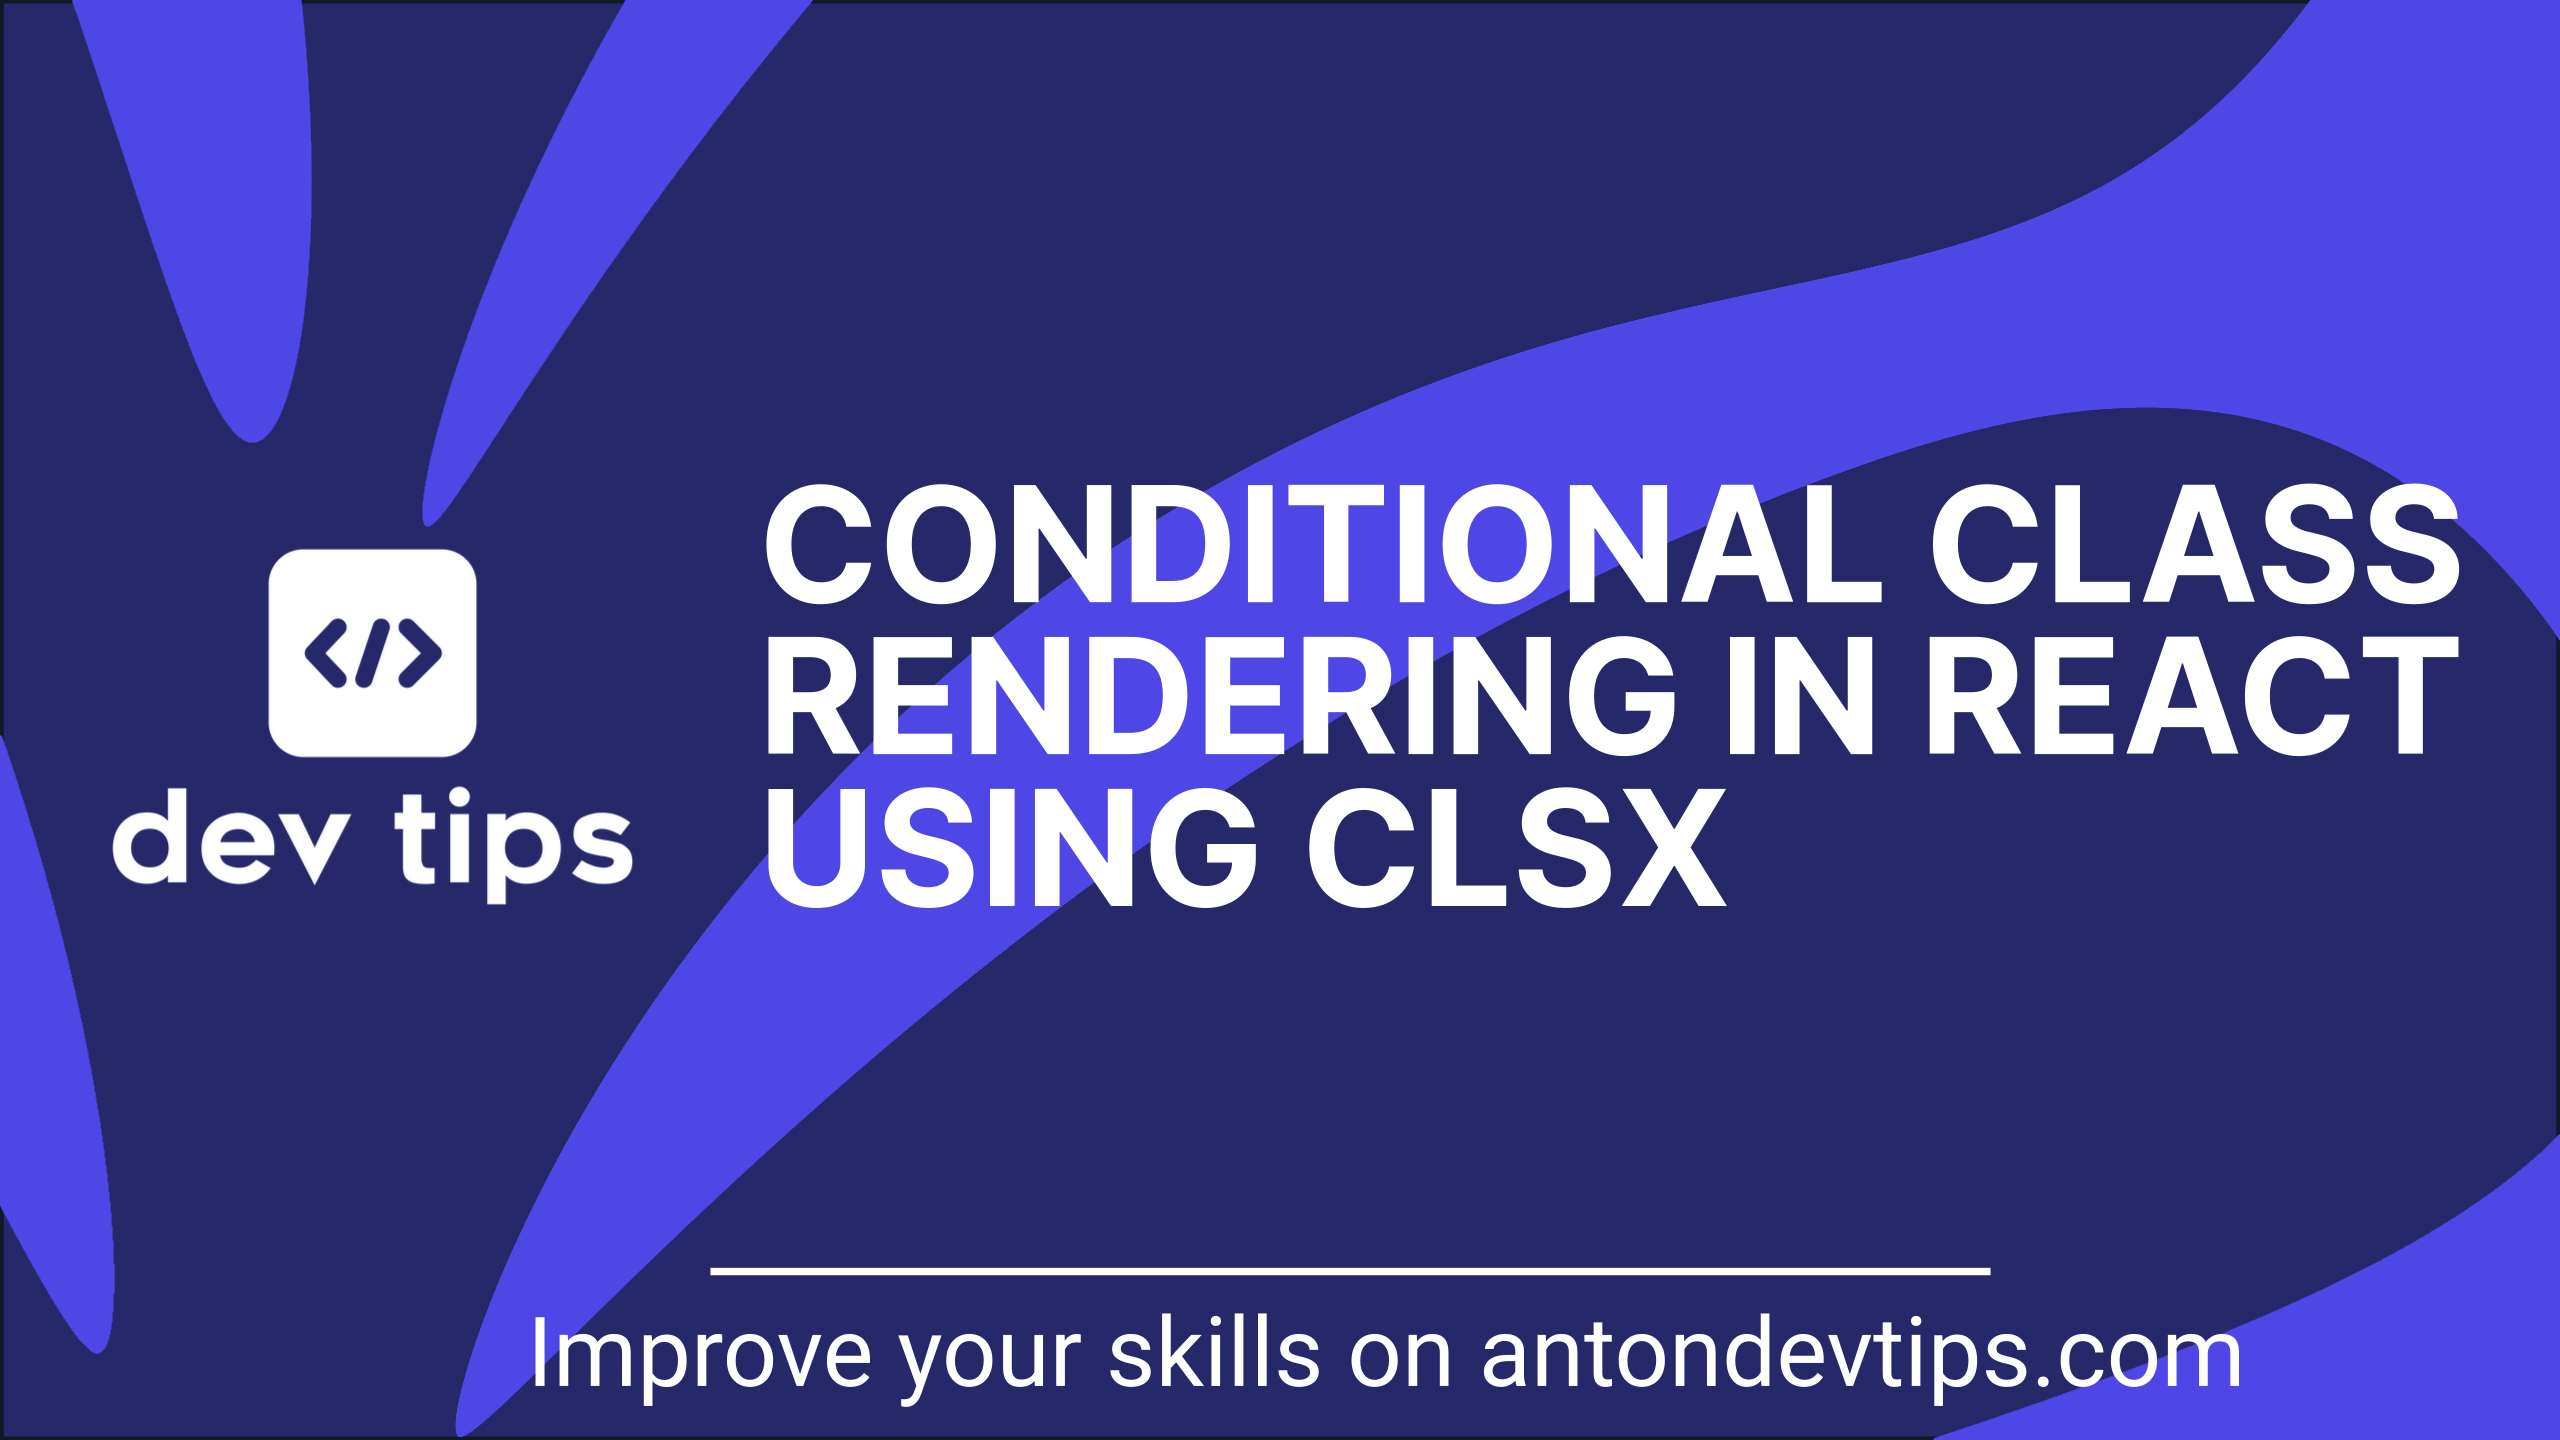 Conditional Class Rendering in React using CLSX